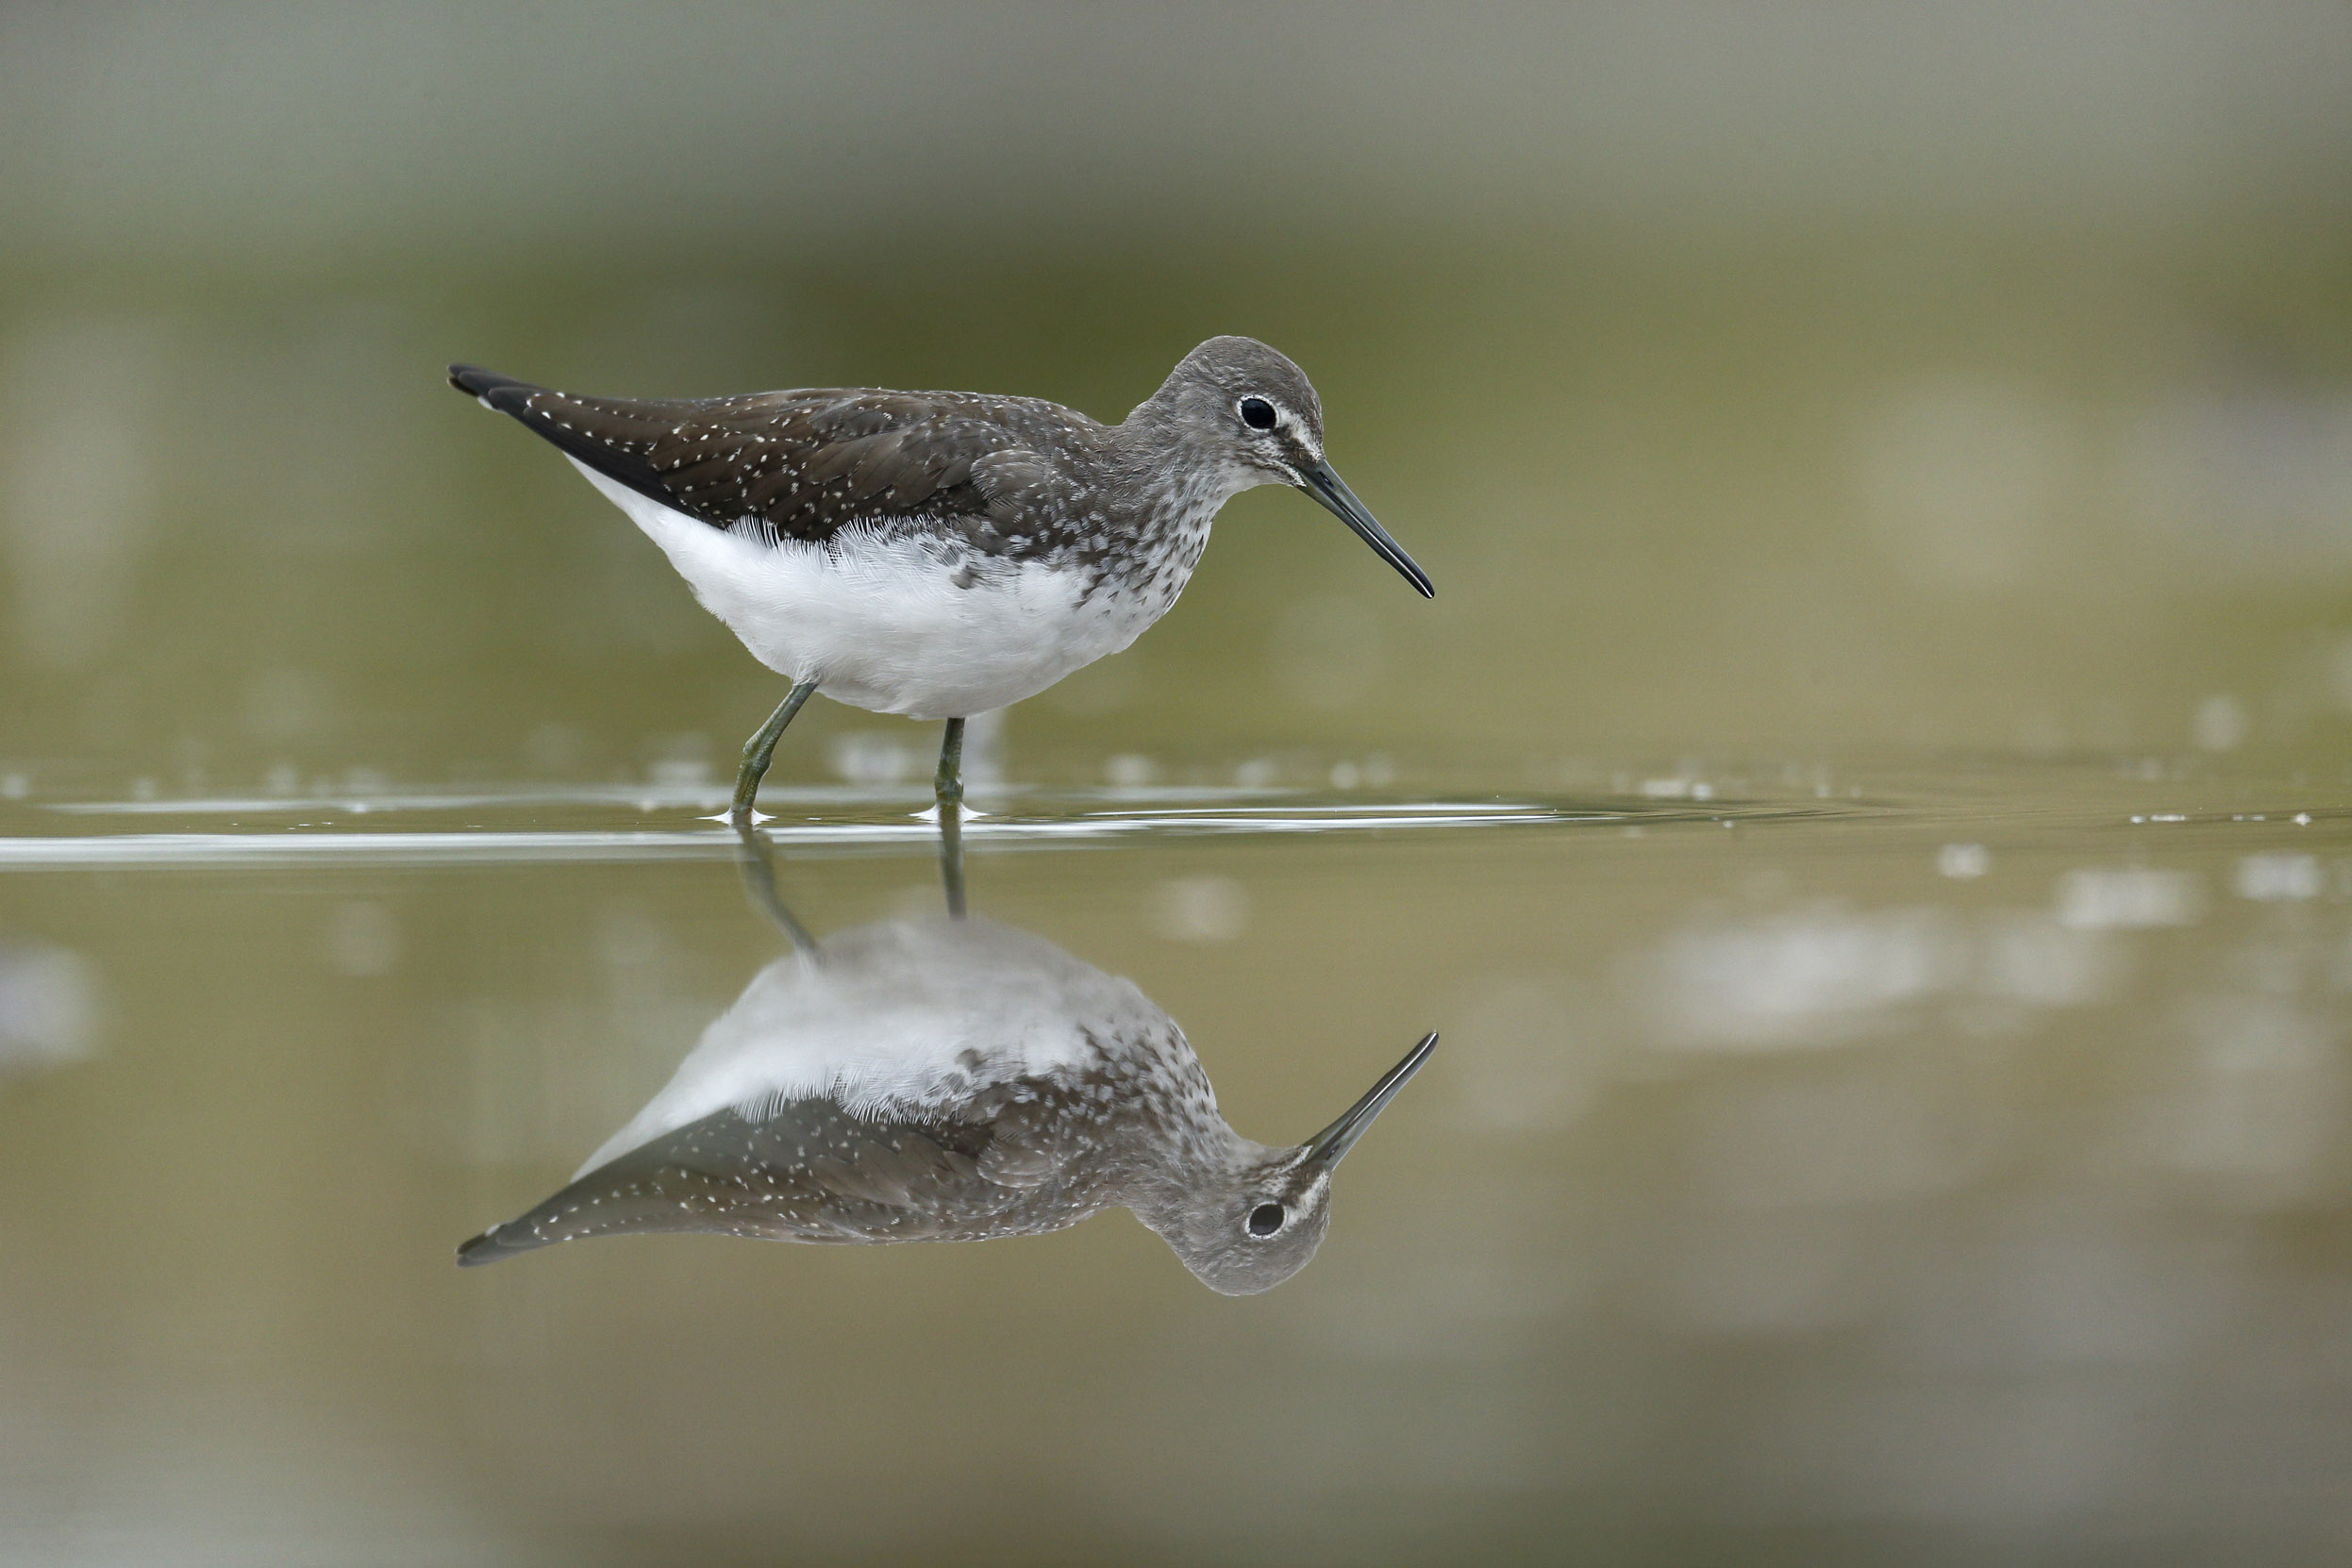 A lone Green Sandpiper looking at their reflection in shallow waters.